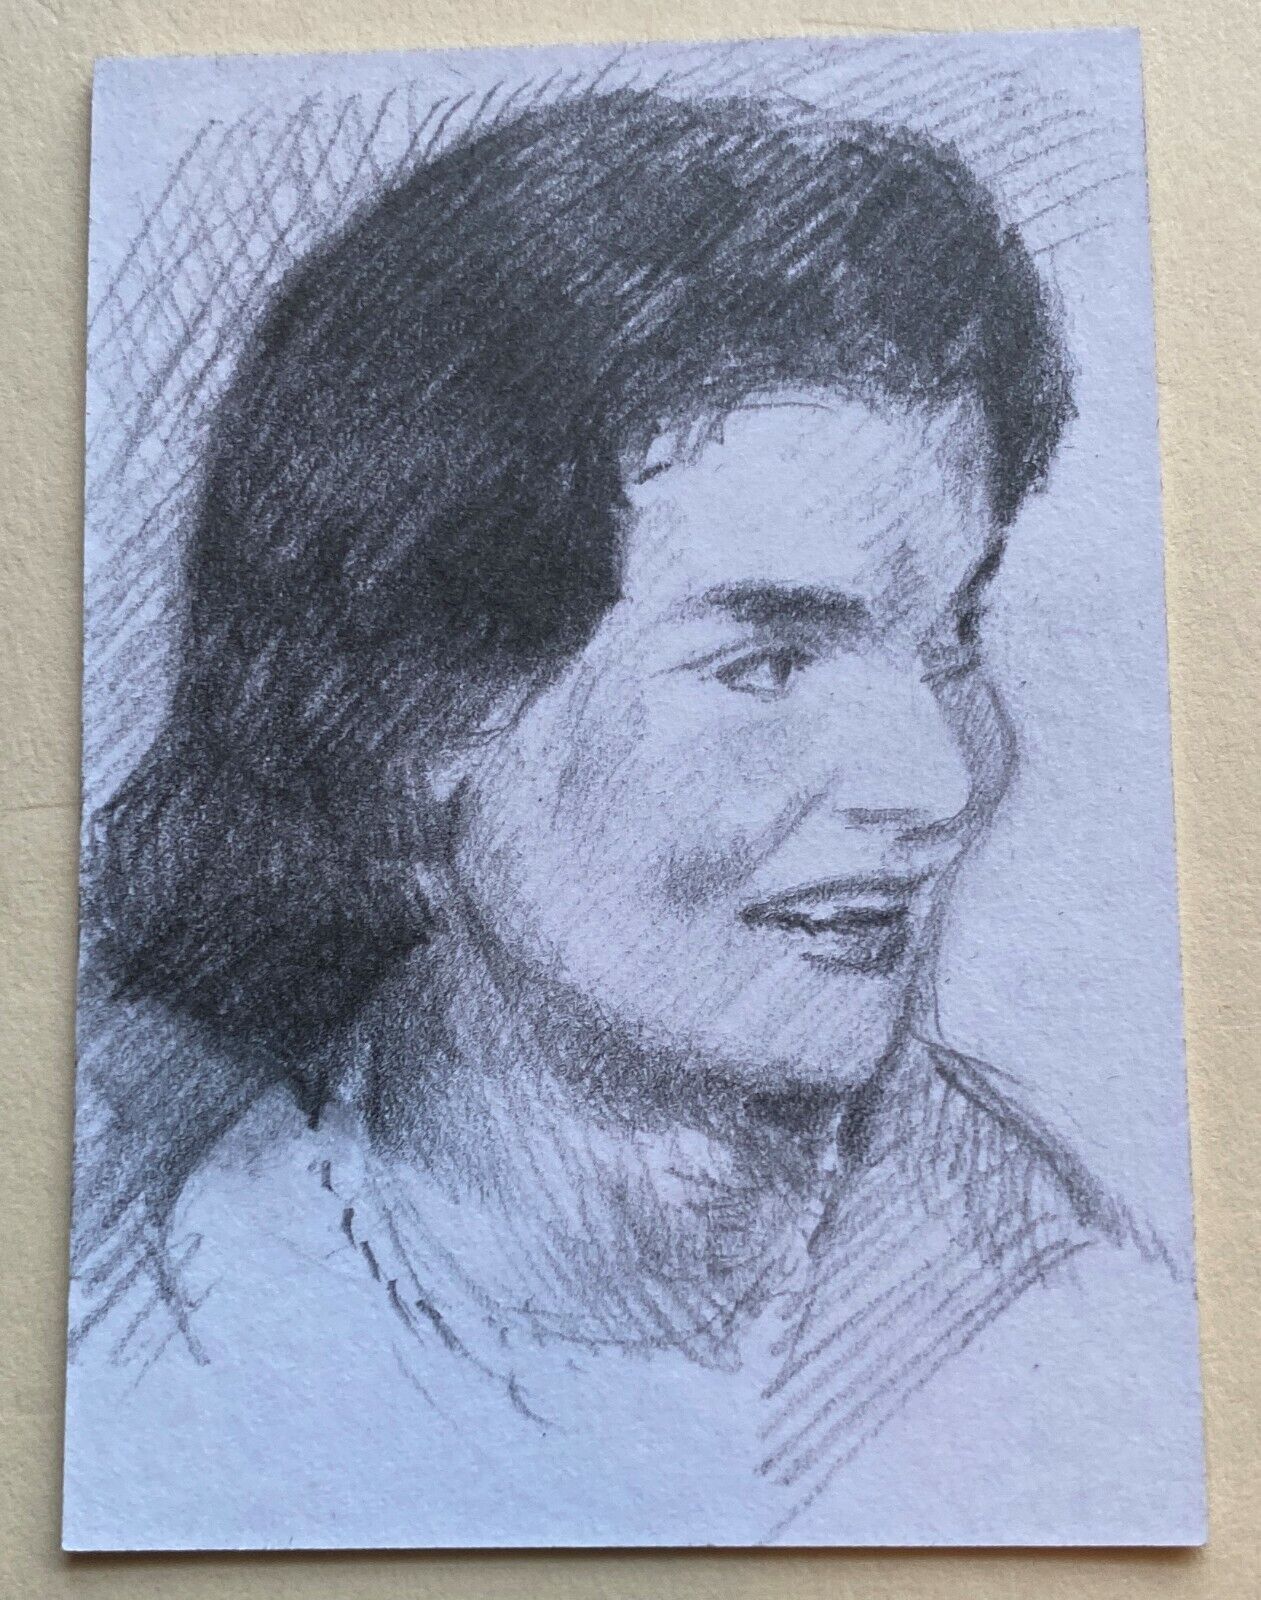 JACQUELINE KENNEDY DECISION 2020 SER2 HAND DRAWN SKETCH 1/1 SIGNED BRYCE KNOTT